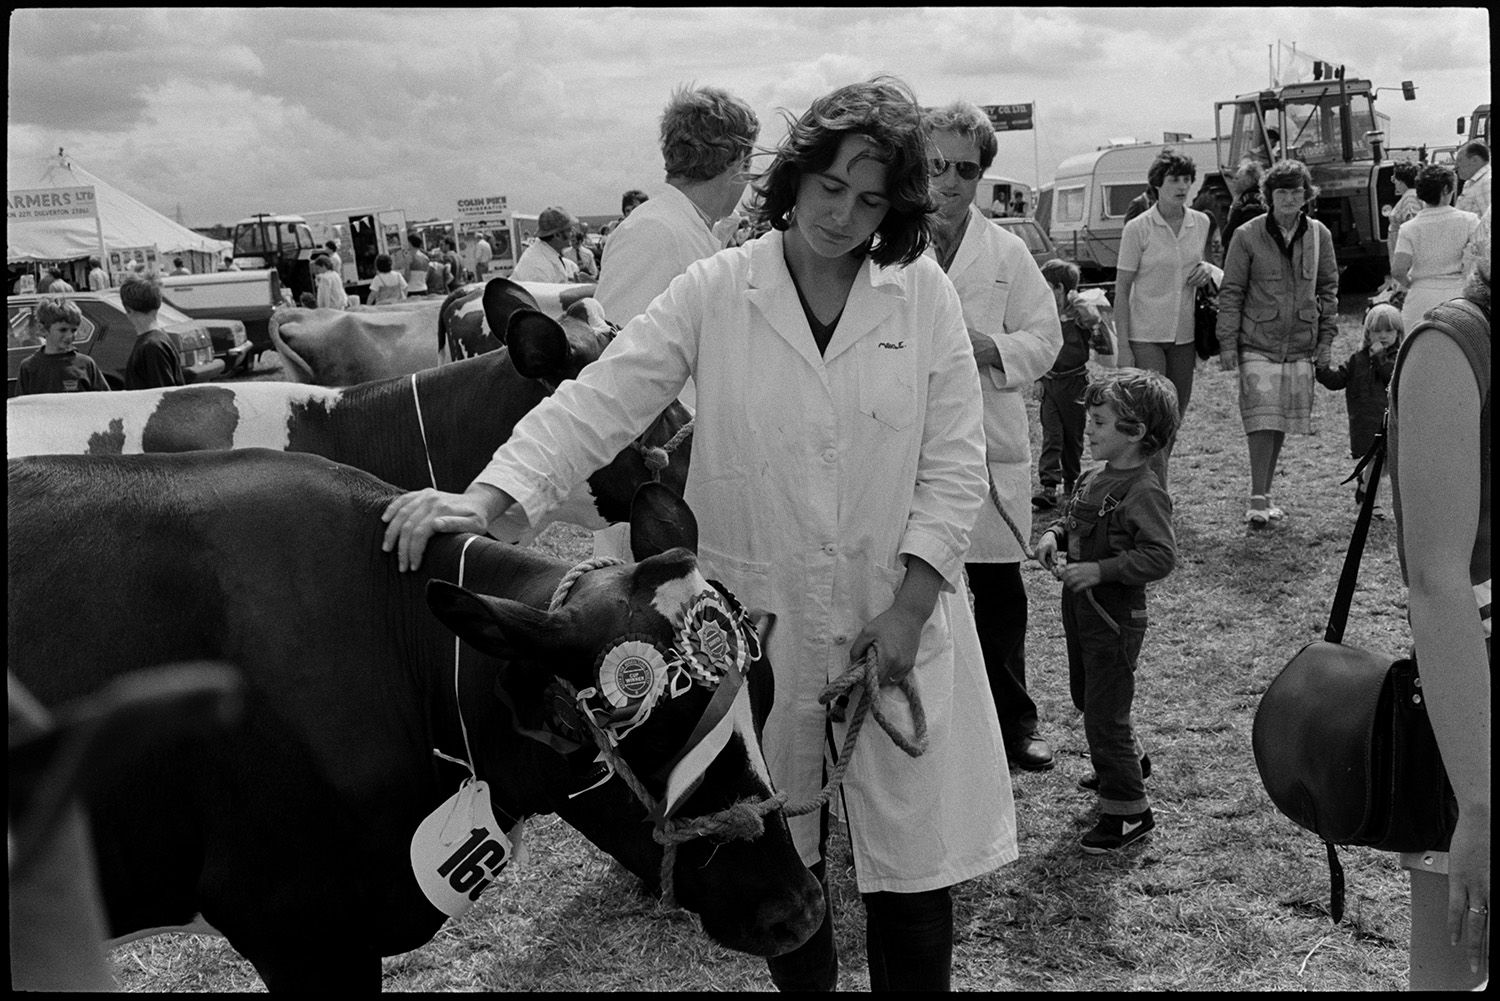 North Devon Show, Prize cattle, sheep, people having teas, woman, mother and baby.
[Woman exhibiting prize Friesian cow at the North Devon Show near Alverdiscott. The cow is wearing rosettes. Other exhibitors, visitors and stands are visible in the background.]